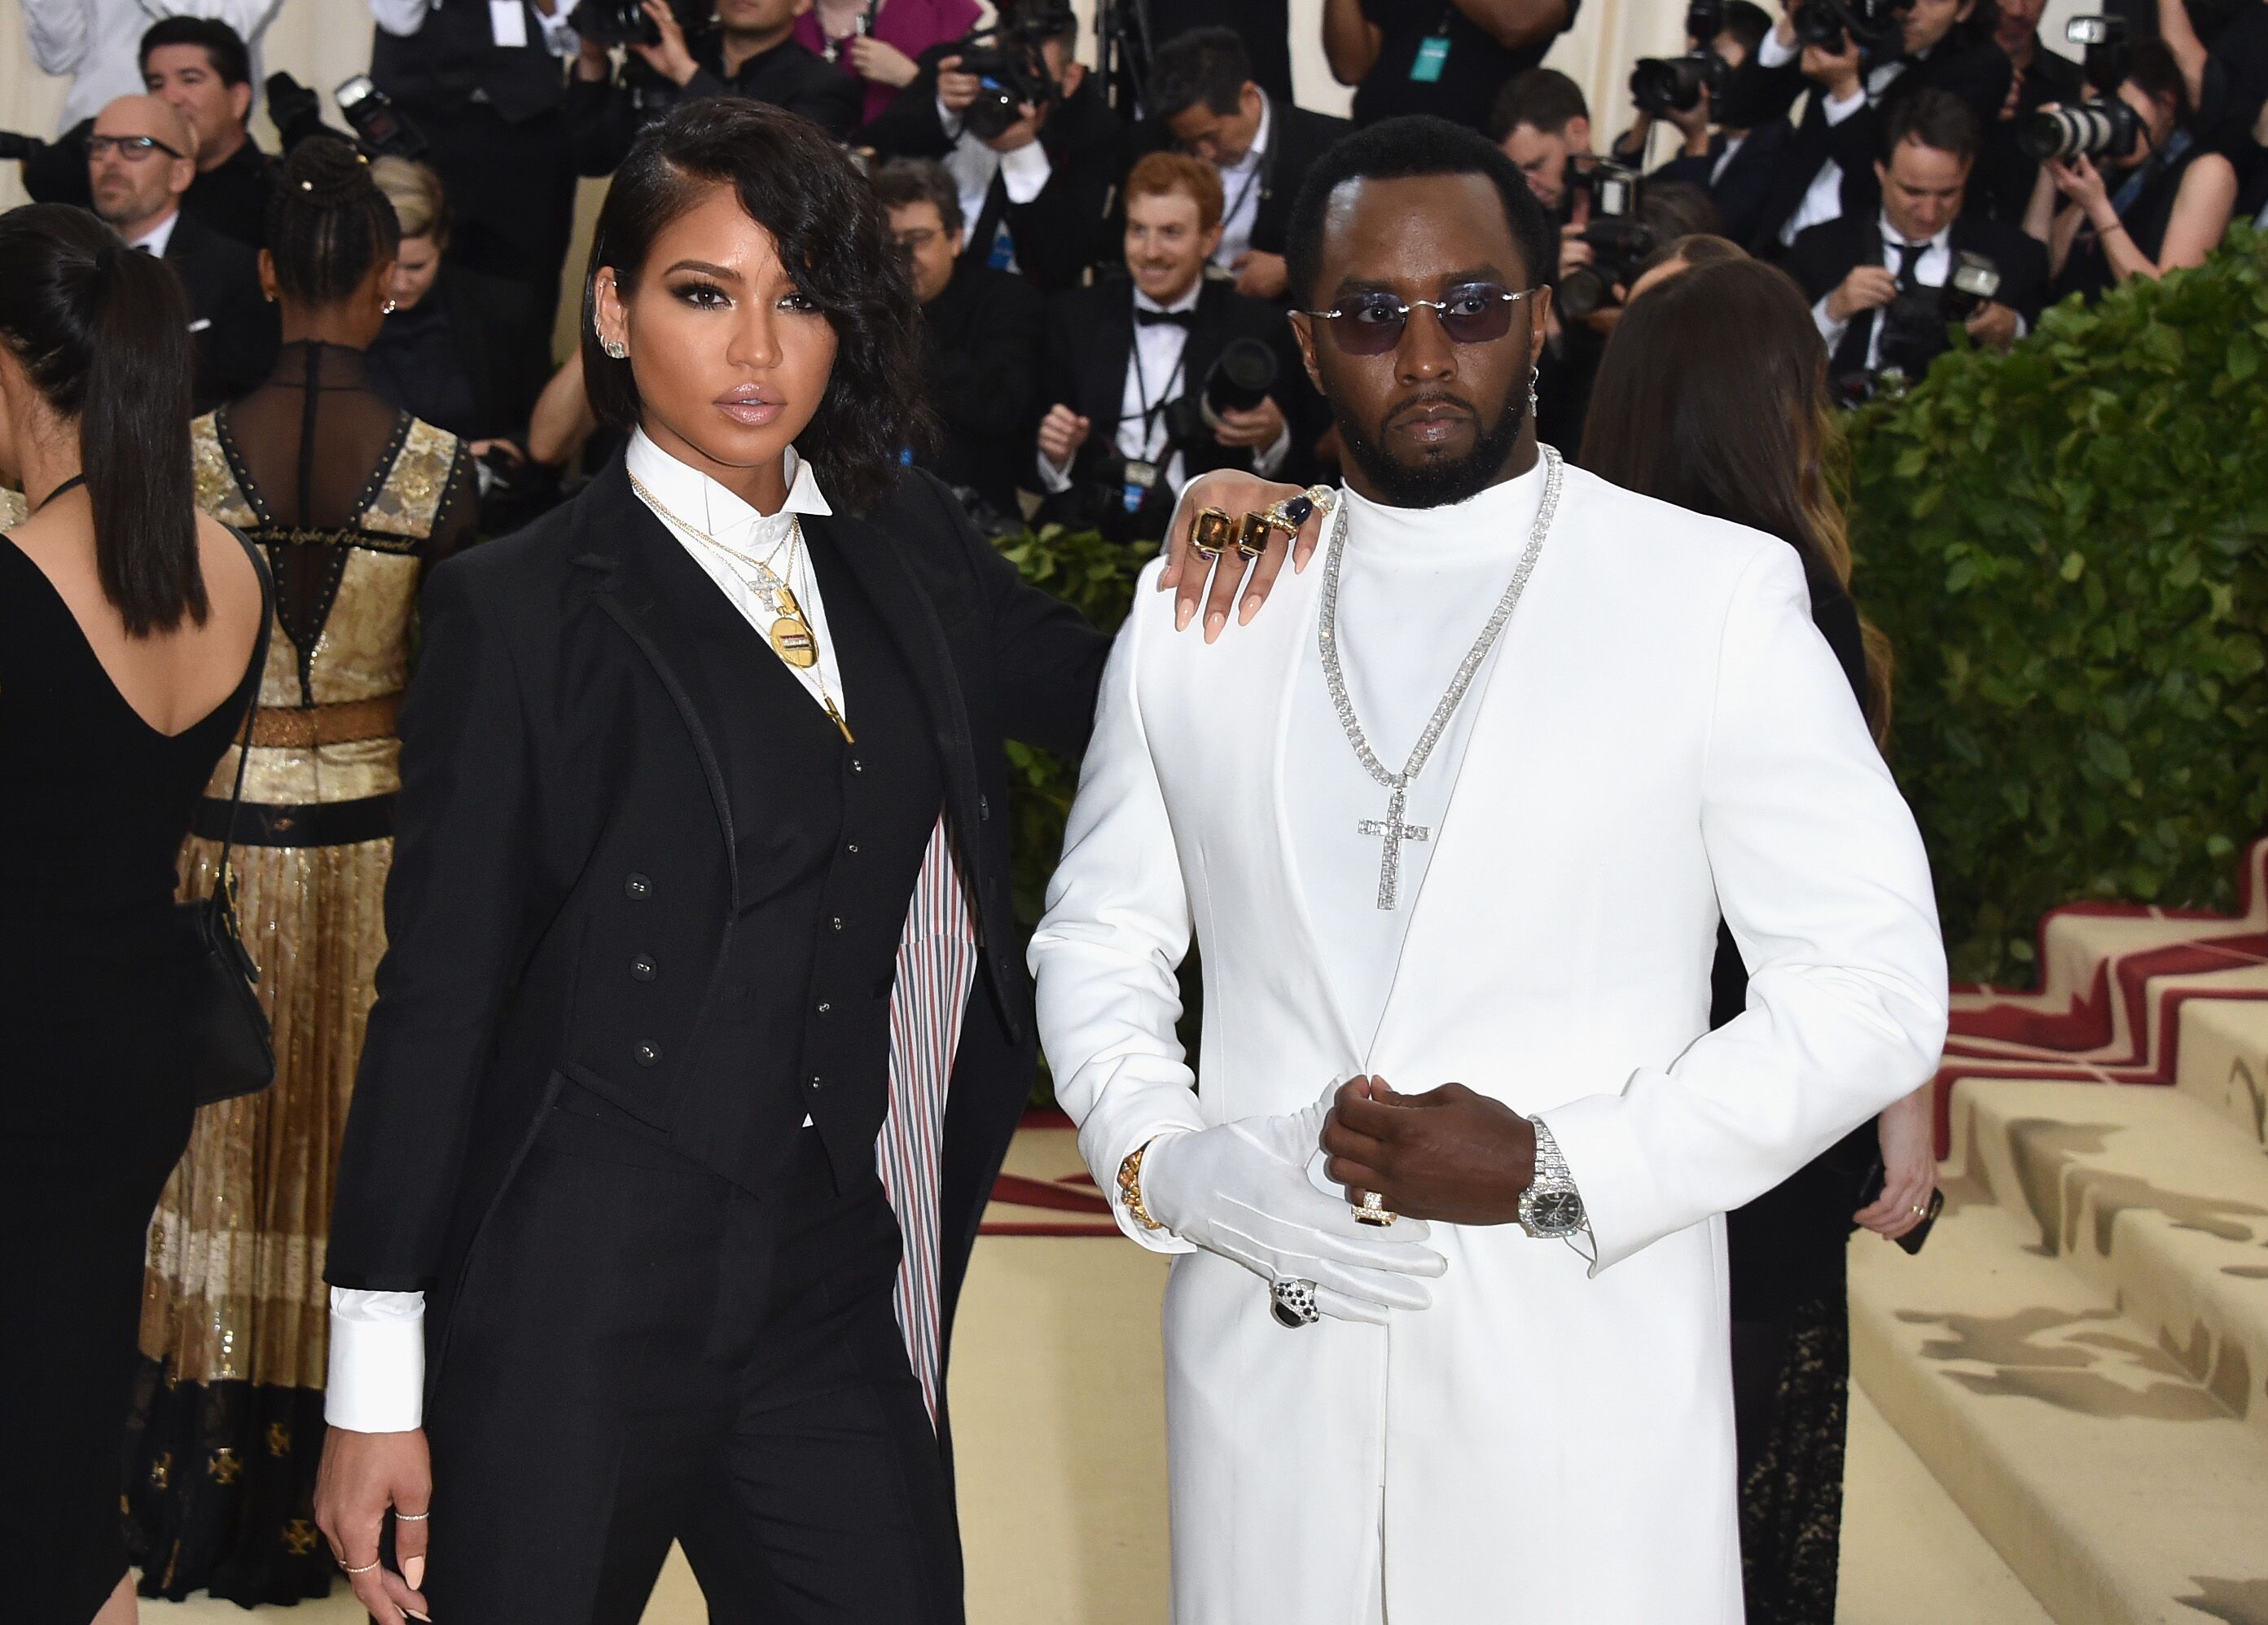 Diddy Combs and Casssie Ventura at the 2018 MET Gala/ Source: Getty Images